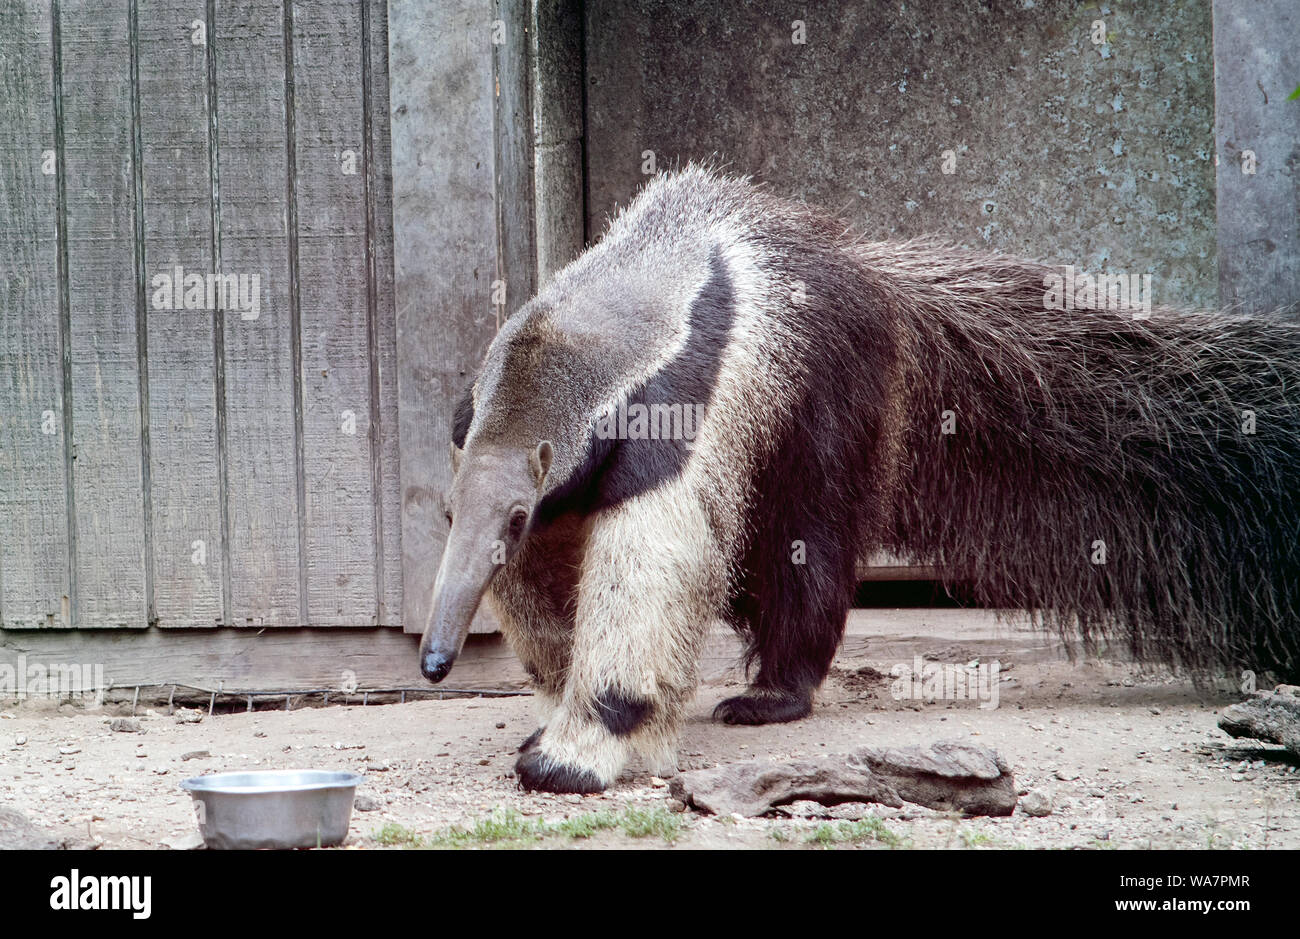 Close up of a Giant anteater in a zoo habitat Stock Photo